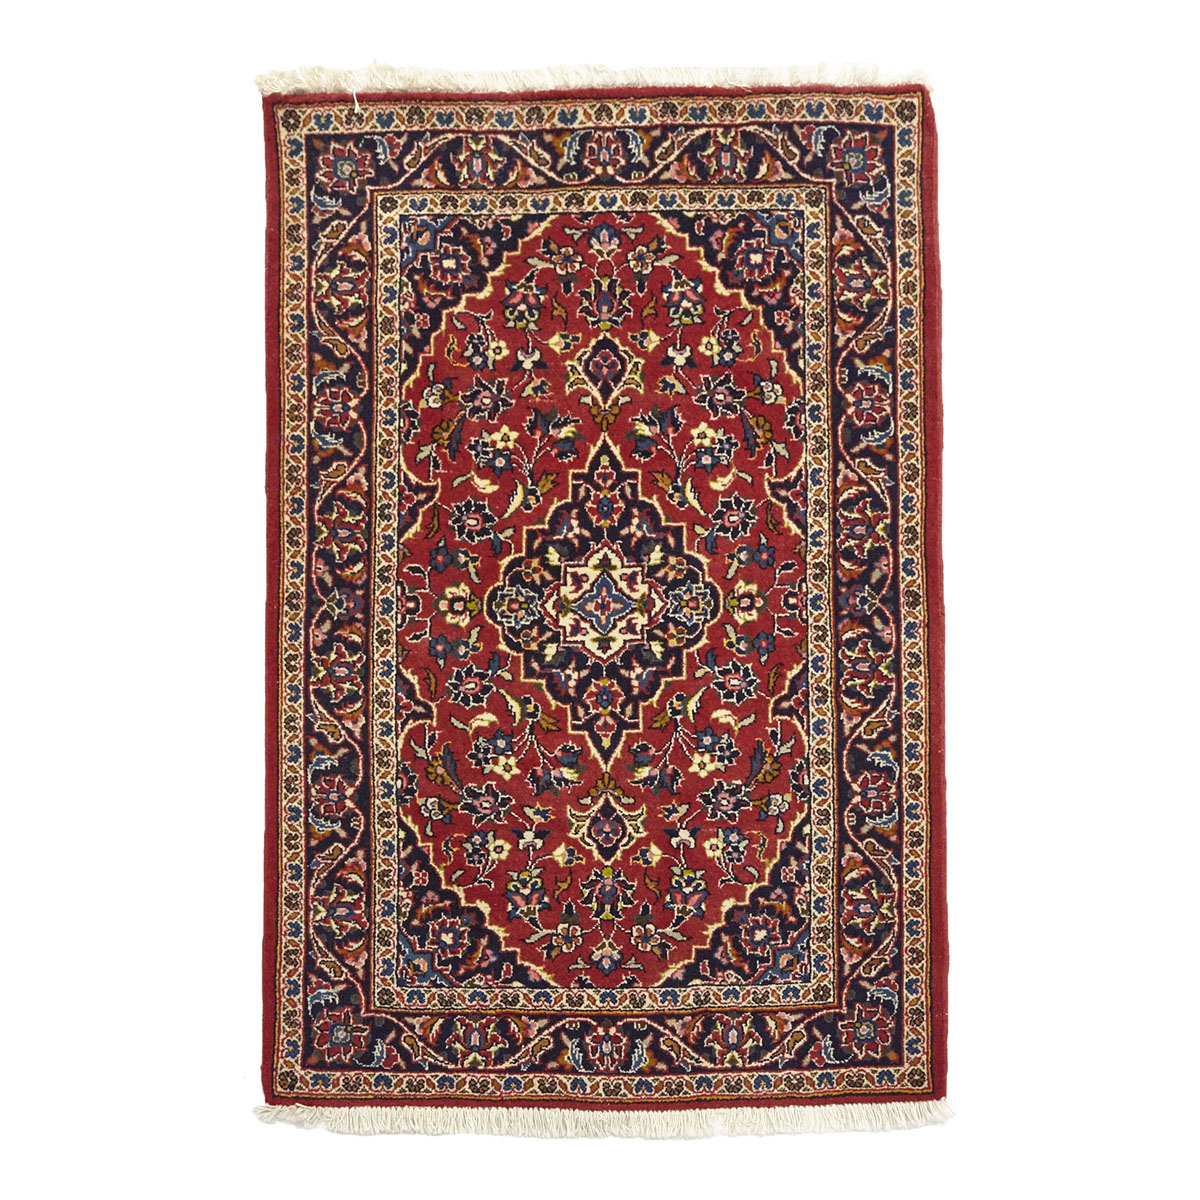 Kashan Rug, mid to late 20th century